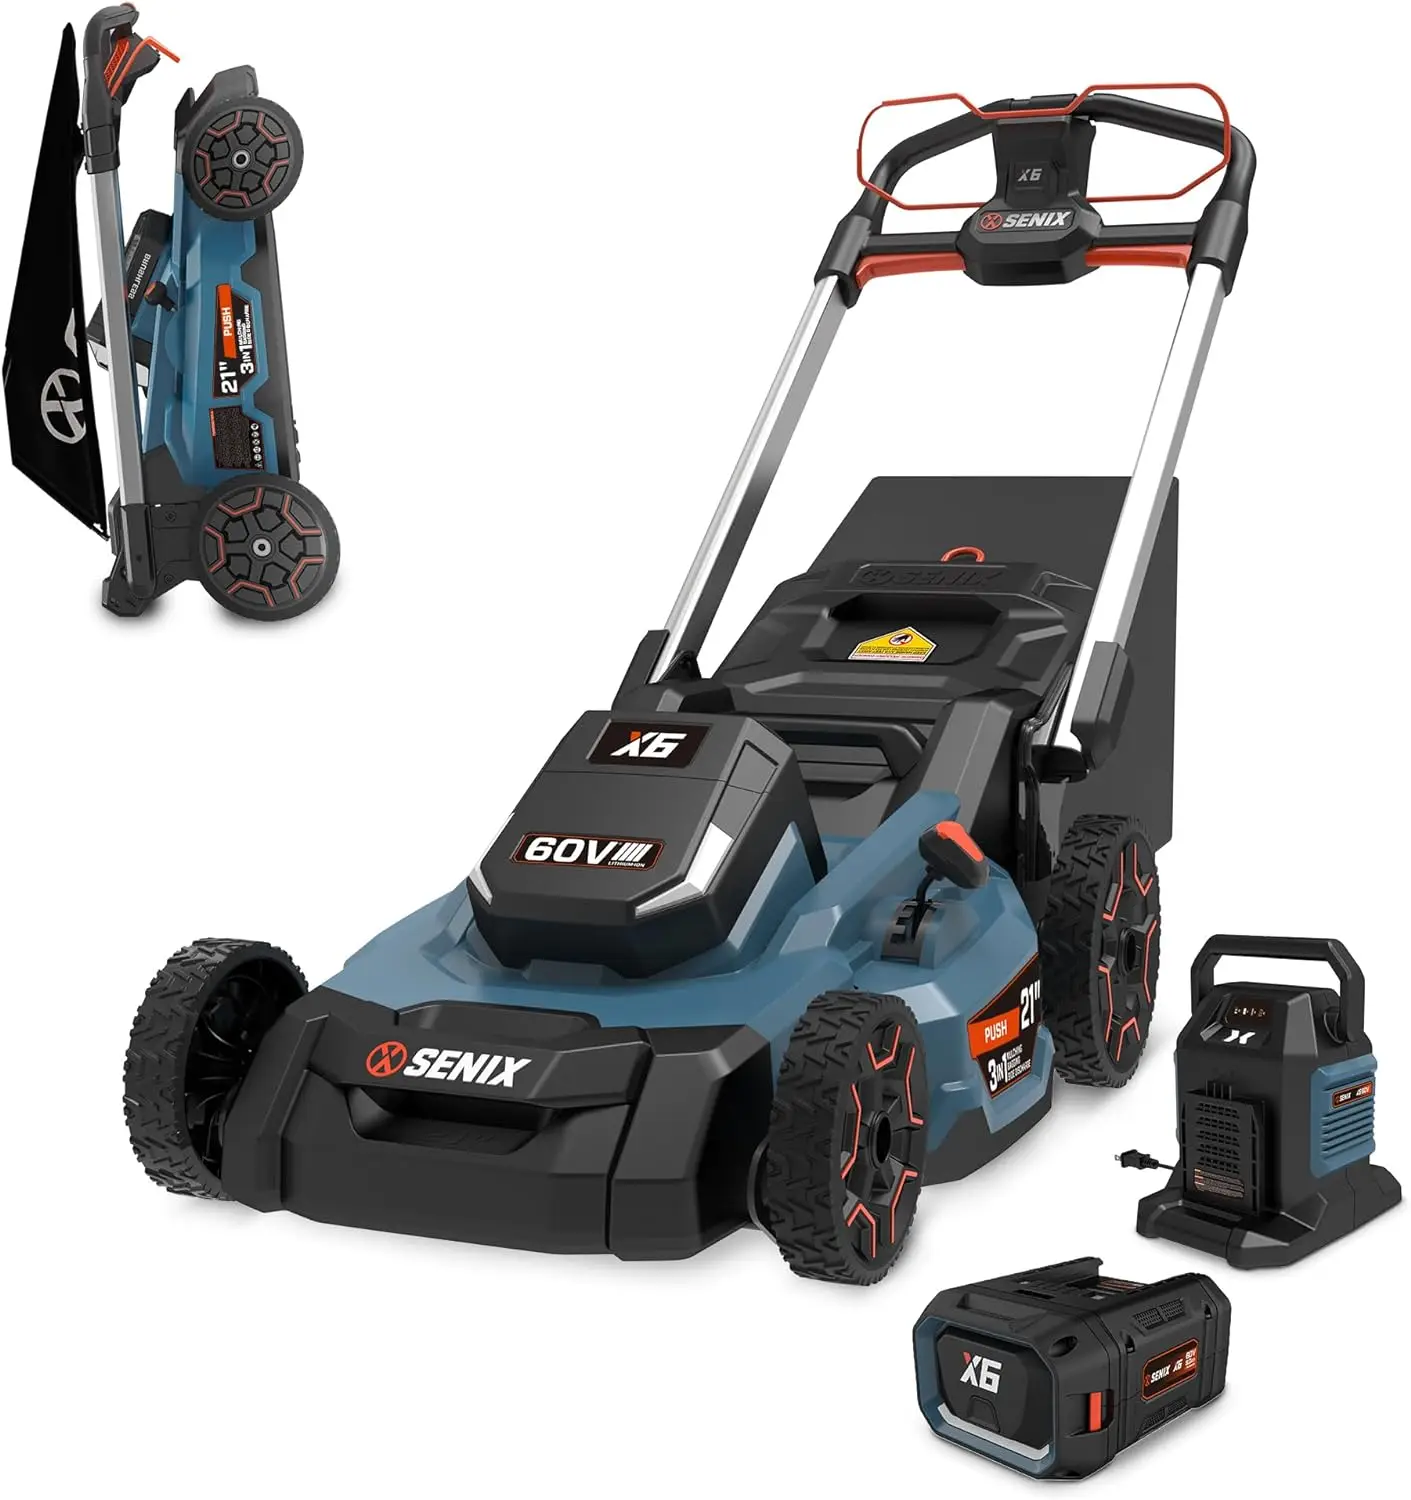 

SENIX X6 60 Volt Max* 21-Inch 3-in-1 Cordless Push Lawn Mower, with Bagging, Mulching, and Side Discharge, Height Adjustment, Sm